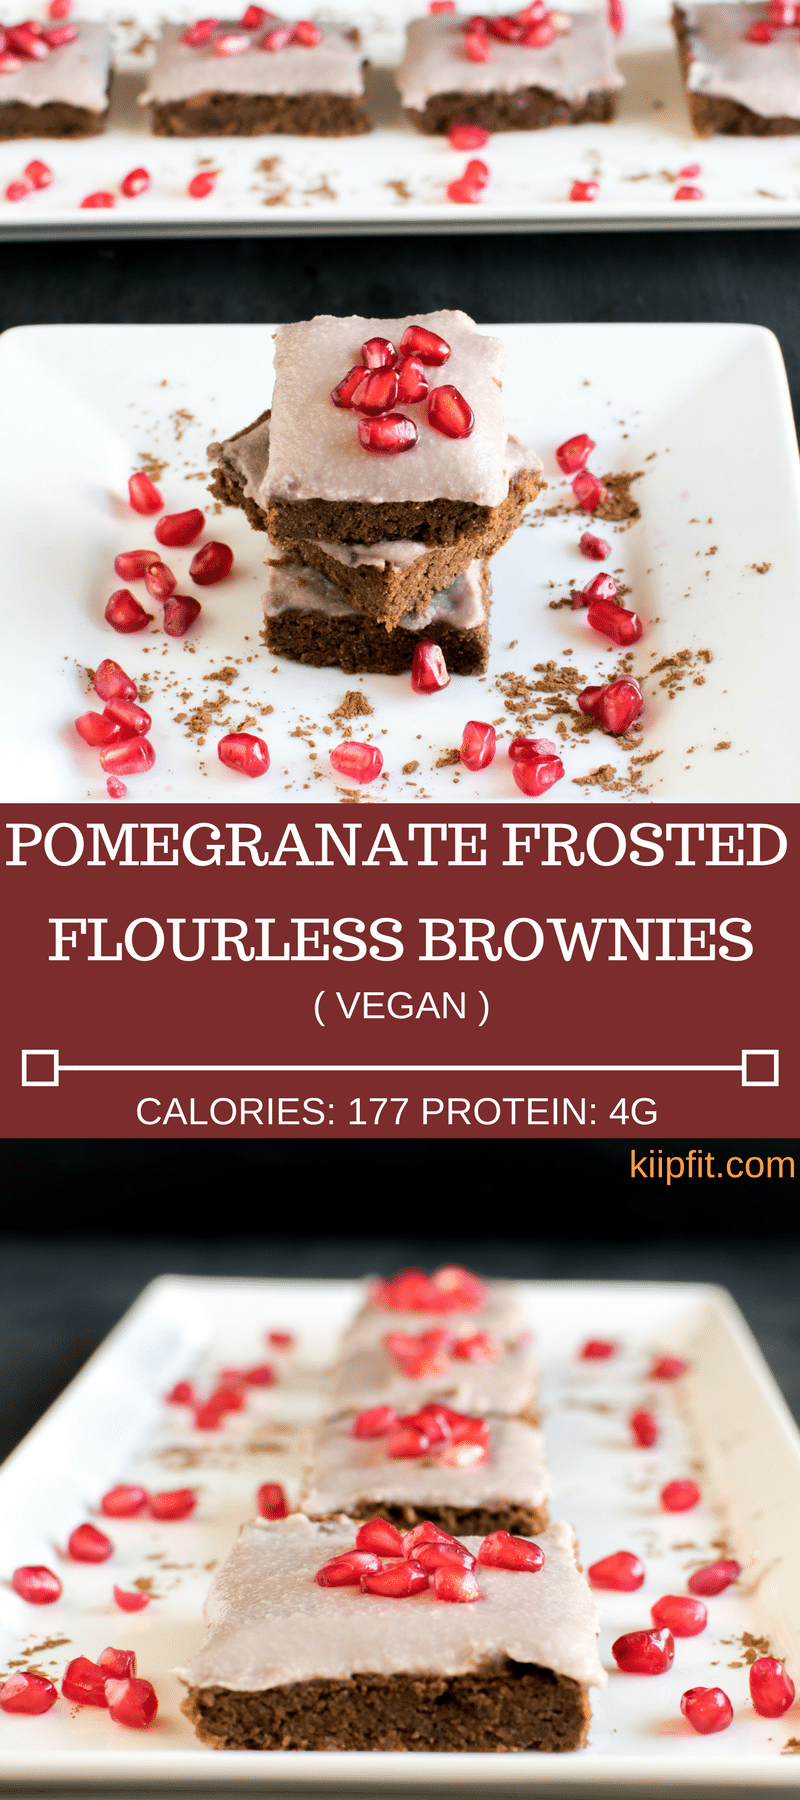 Pomegranate Frosted Flourless Brownies made with loads of love and care is packed with deliciousness. The chewy texture of this flourless brownies and freshly prepared pomegranate frosting is simply outstanding. Once you bite on it I bet you cannot stop until you finish the entire batch. The combination of chocolate and fresh pomegranate kernels in itself is mind boggling. The flavors tantalize the taste buds with immense pleasure and satisfaction [ vegan + paleo + gf ] kiipfit.com